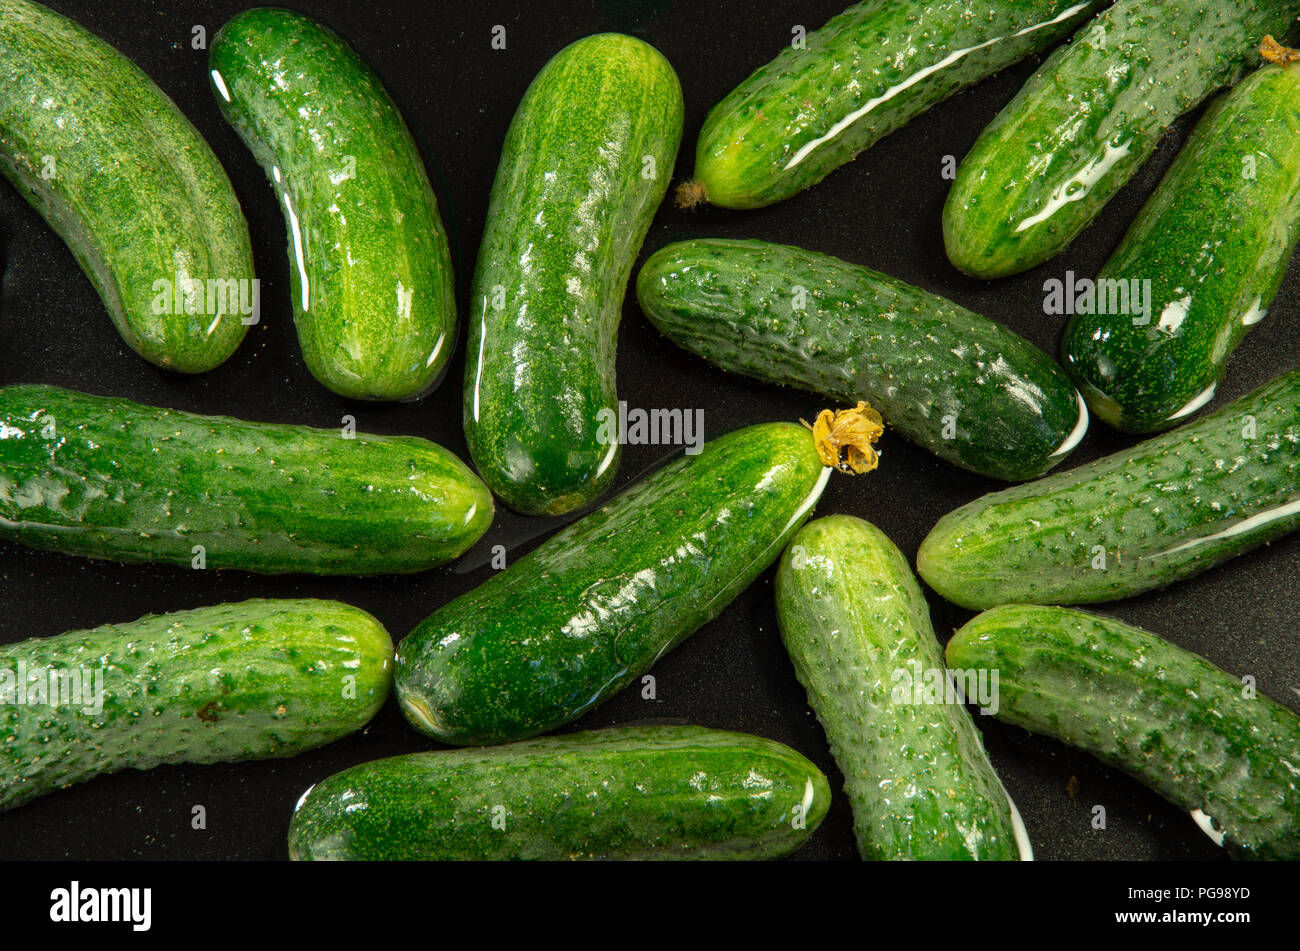 Top view of green cucumbers in water for washing as food background Stock Photo